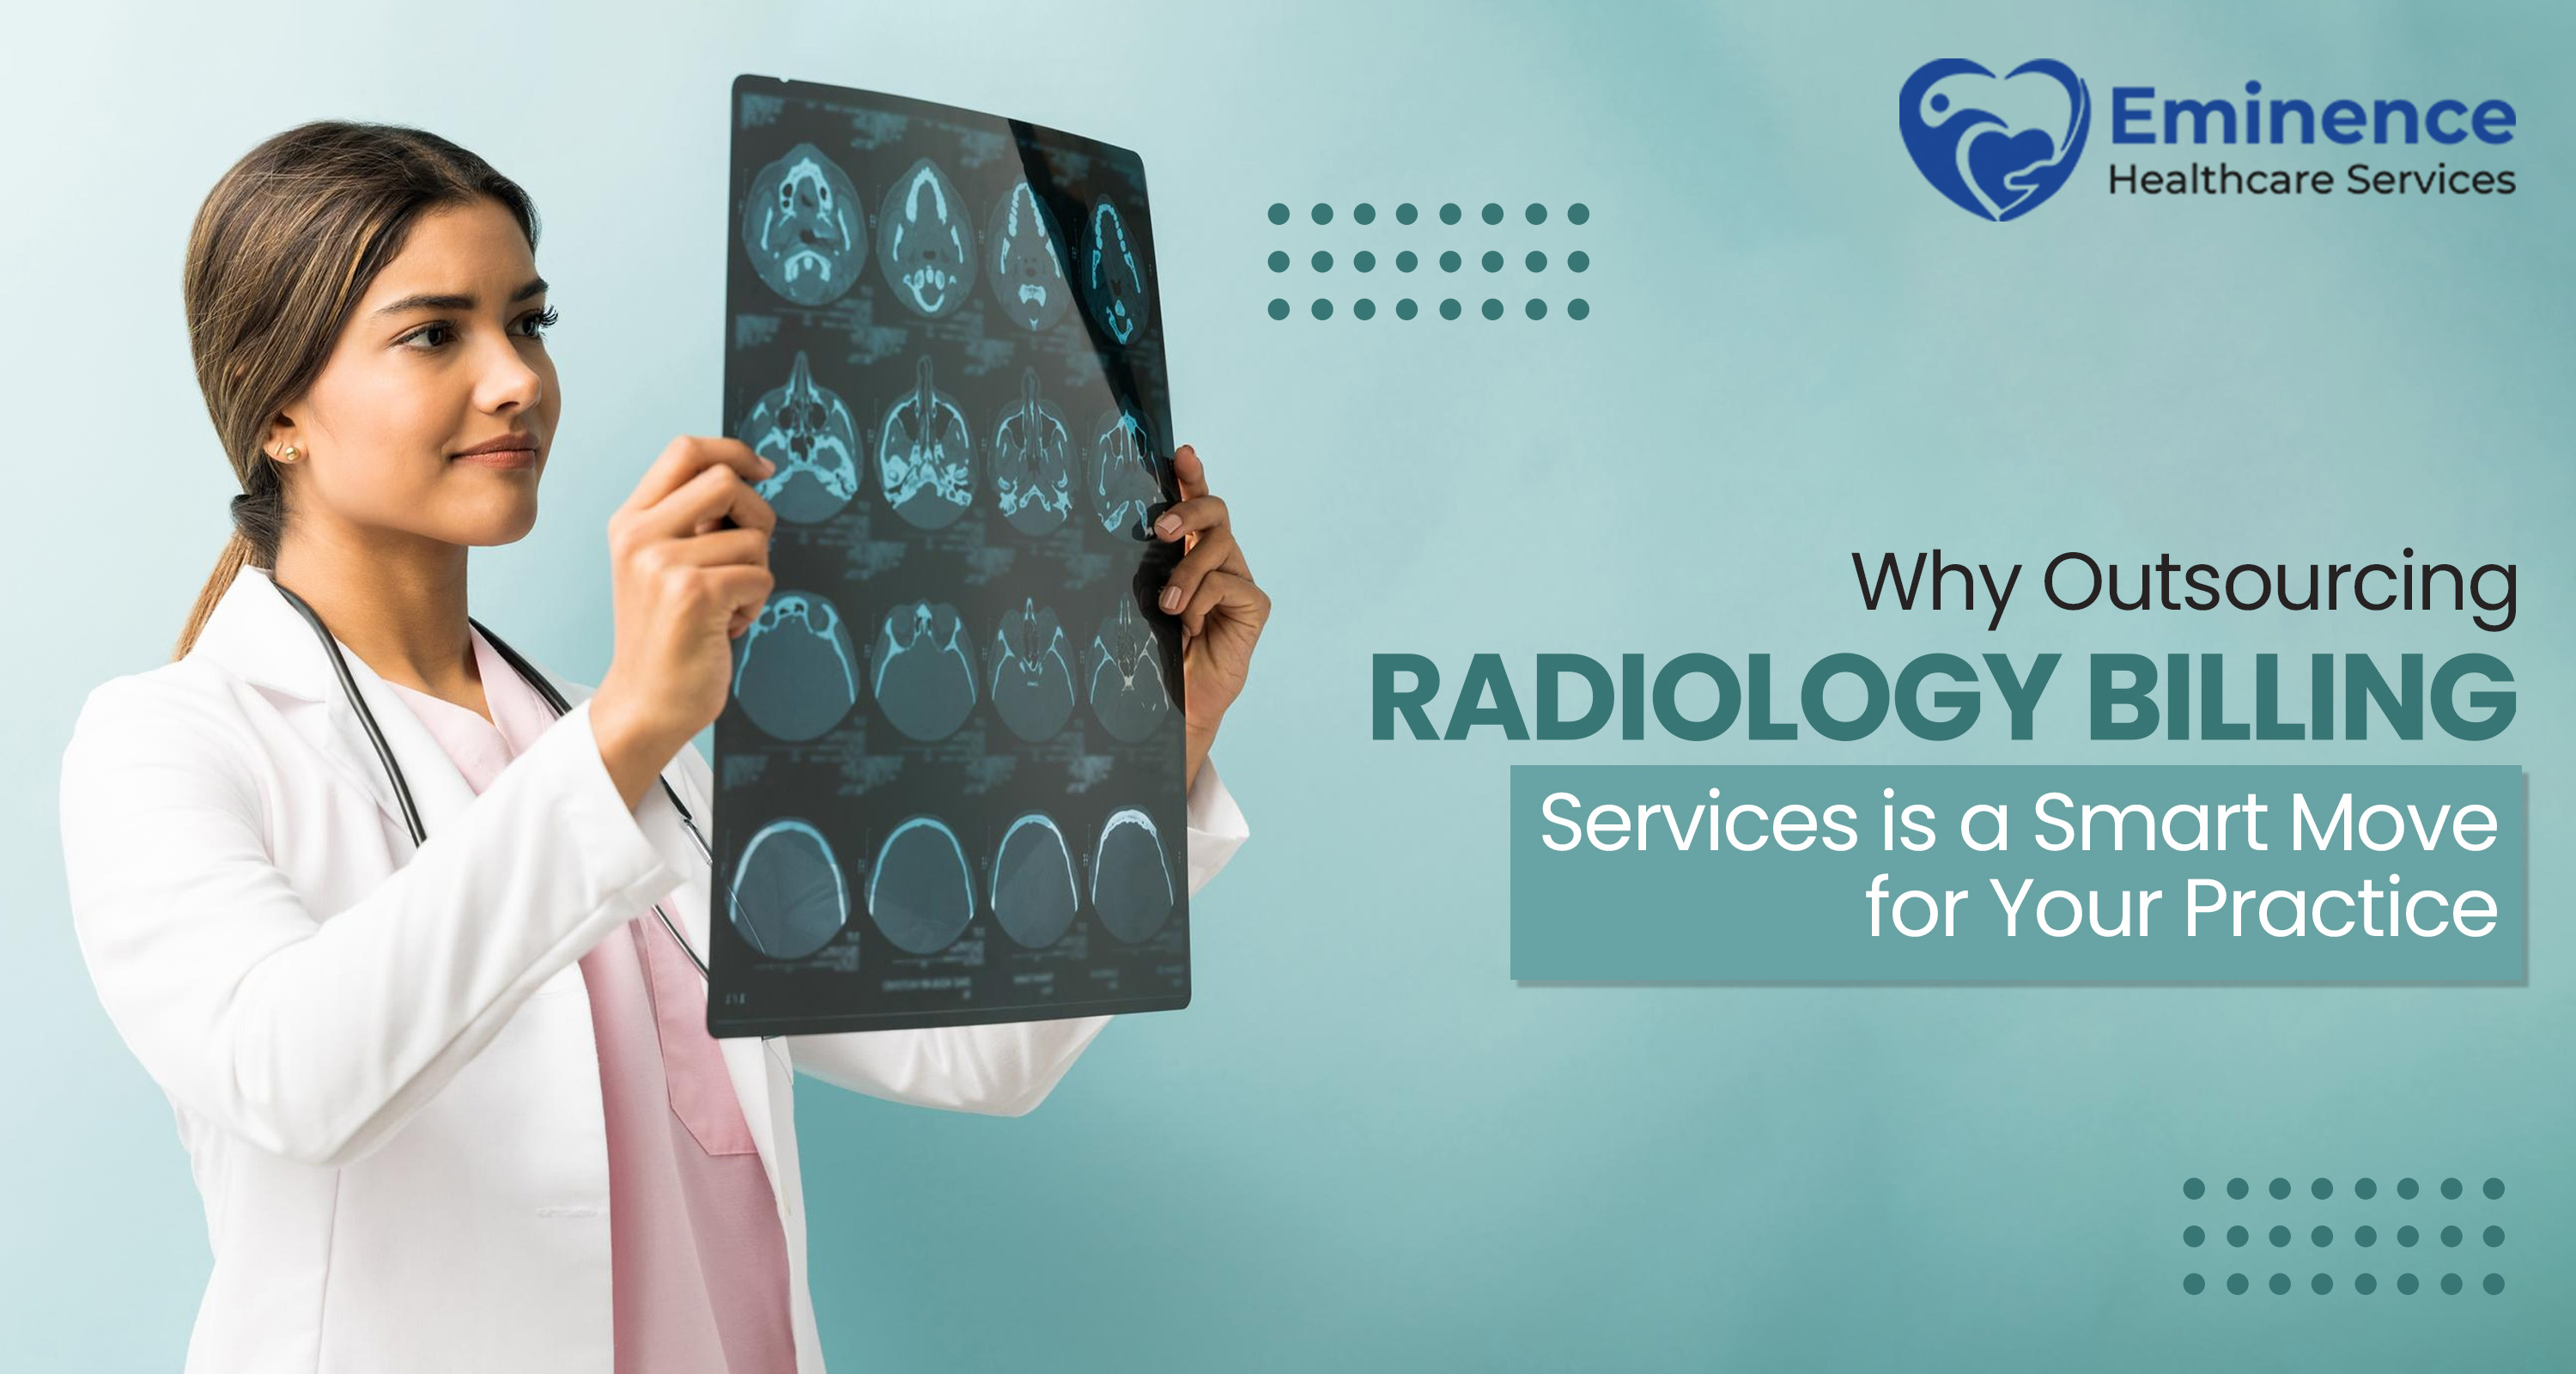 Why Outsourcing Radiology Billing Services is a Smart Move for Your Practice